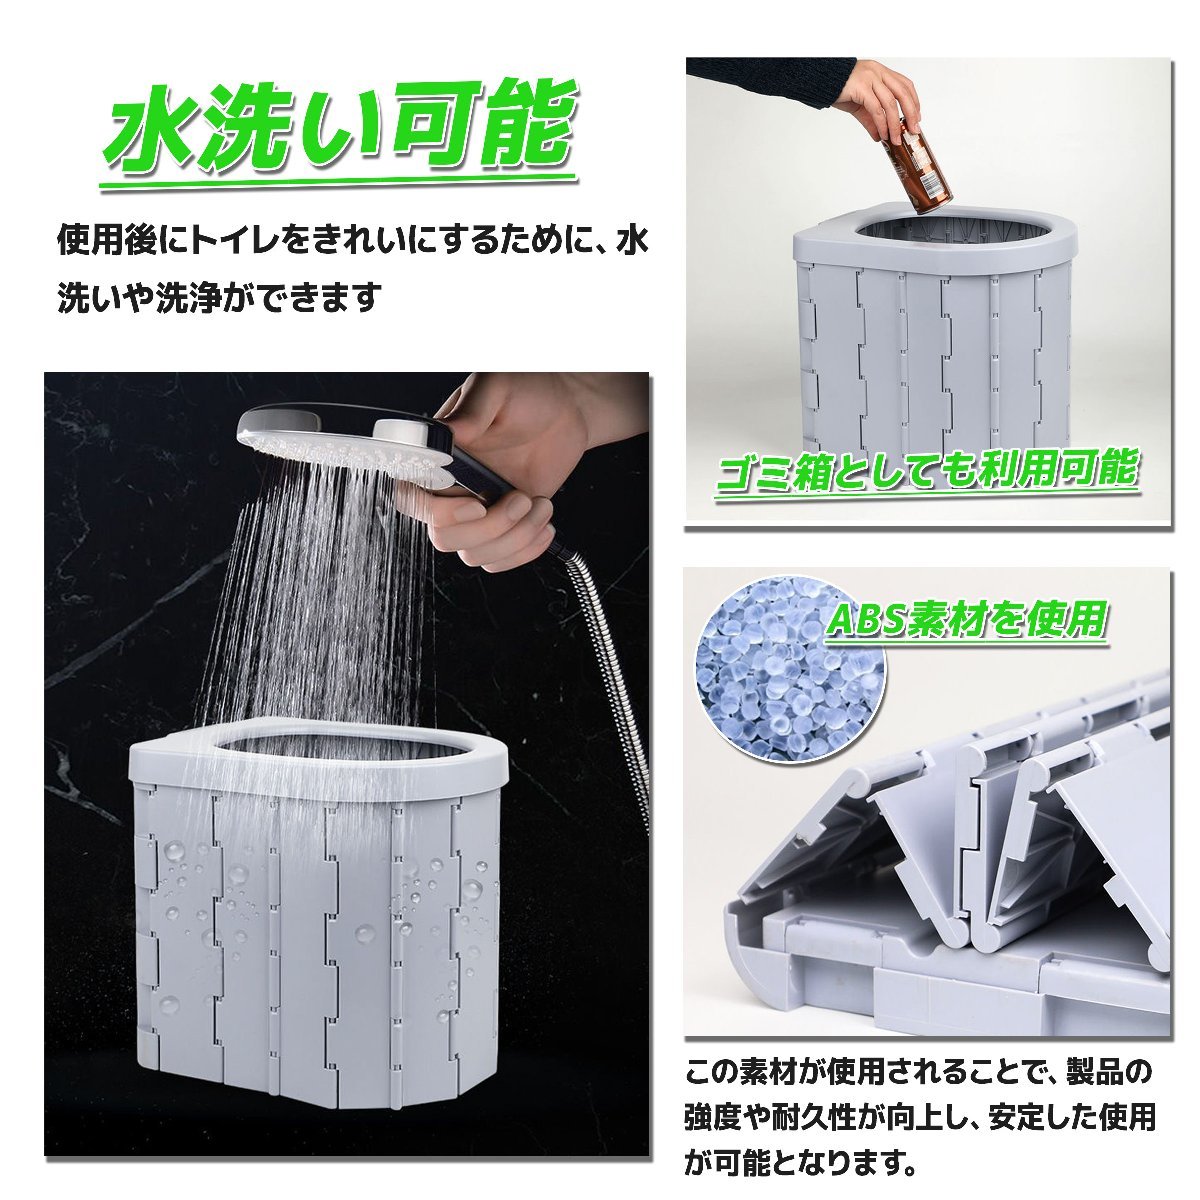  vinyl sack *...12 batch attaching simple toilet folding type disaster prevention outdoor car disaster for portable camp light weight mobile toilet 